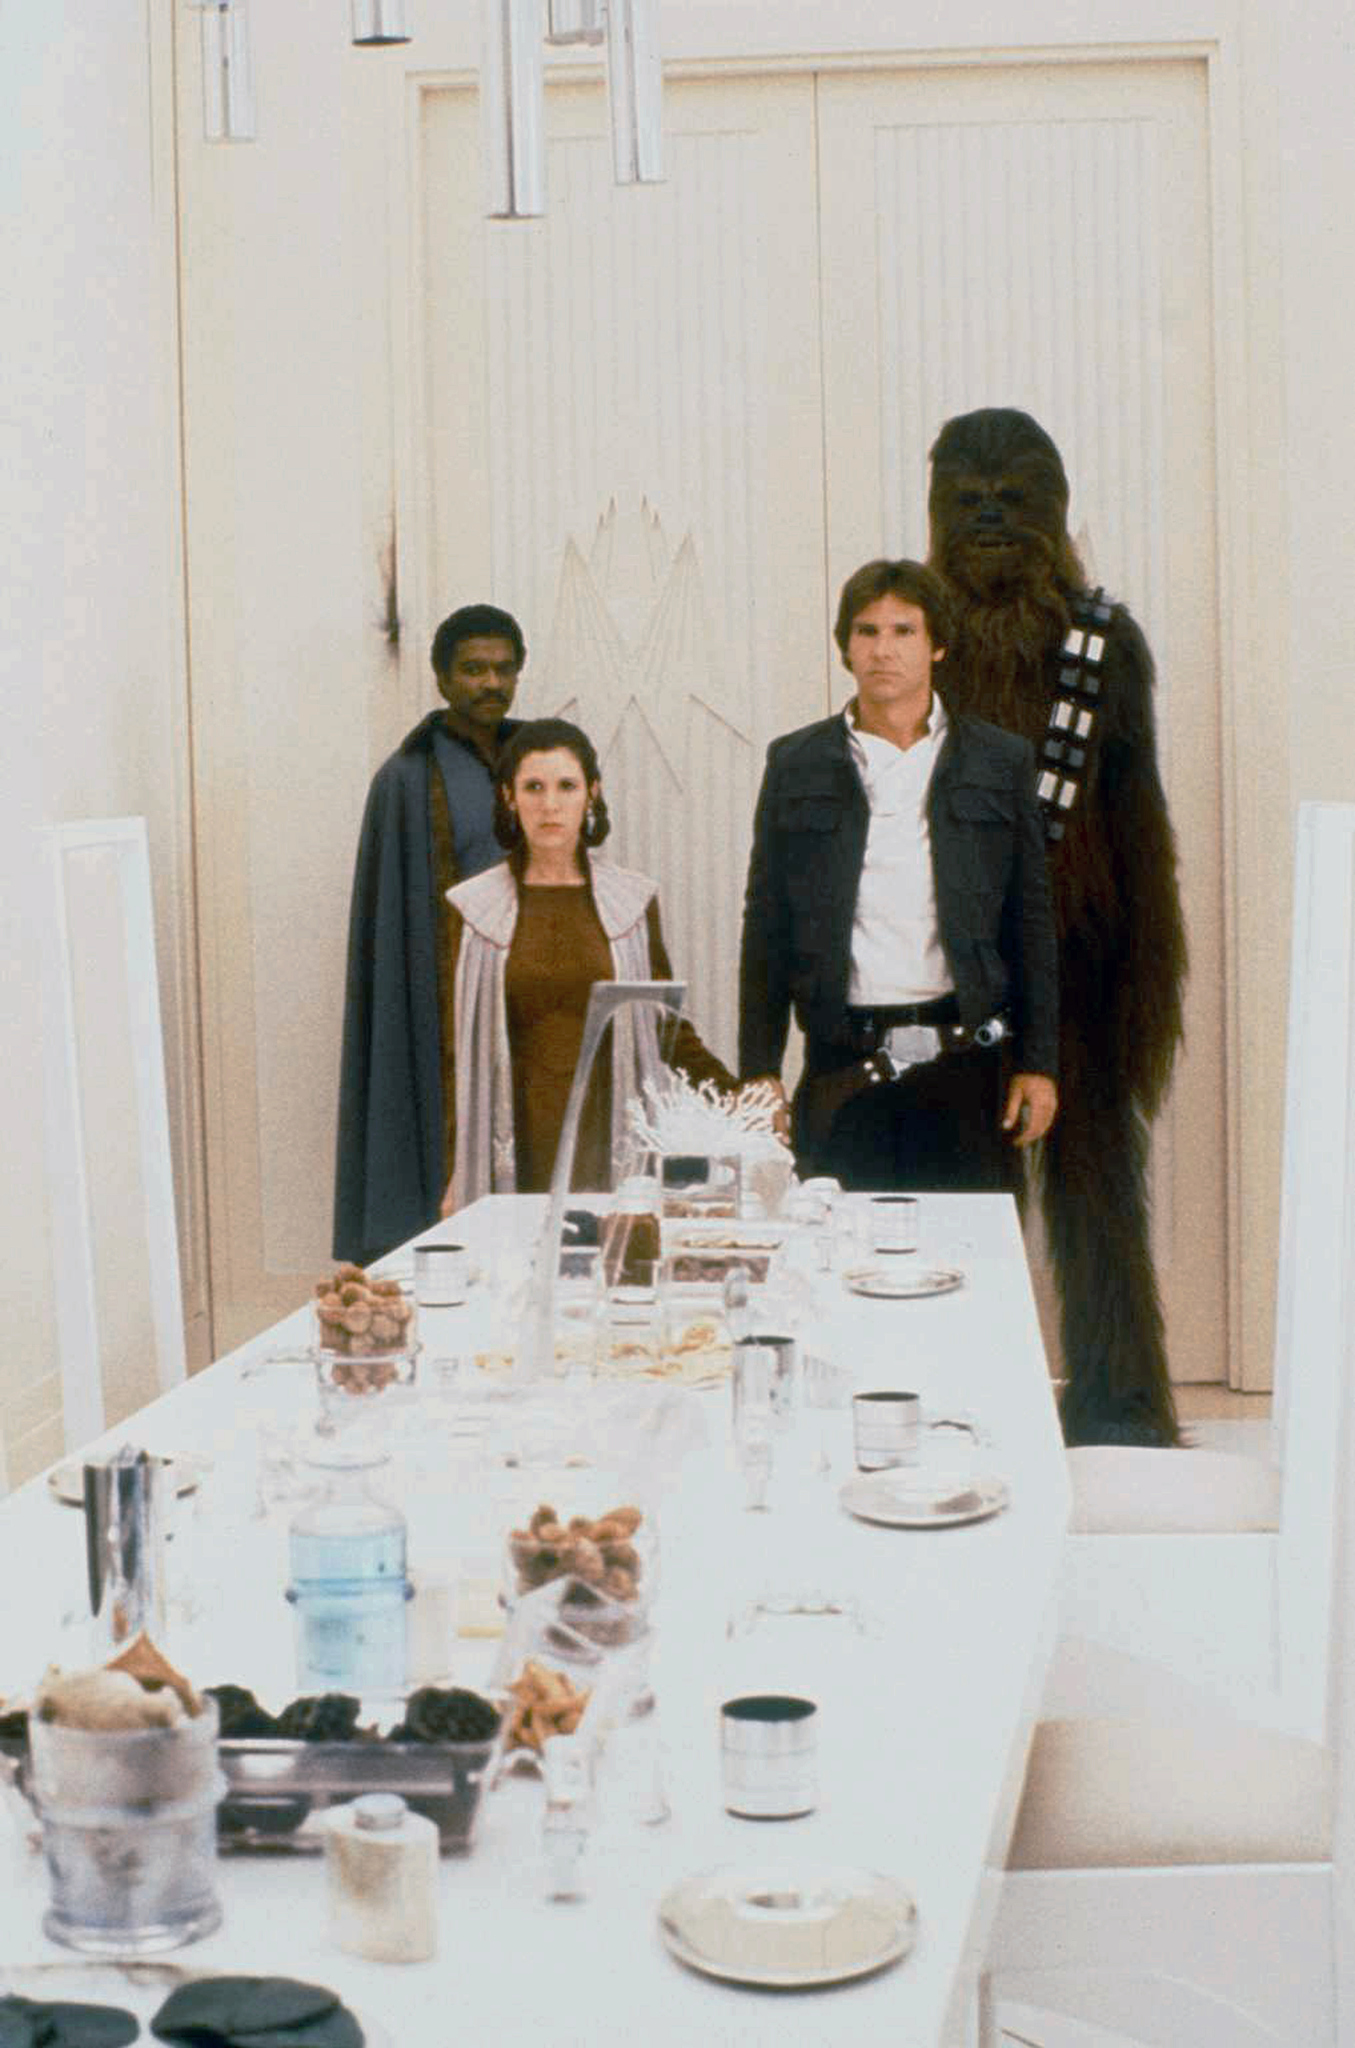 Harrison Ford, Carrie Fisher, Billy Dee Williams, and Peter Mayhew in Star Wars: Episode V - The Empire Strikes Back (1980)